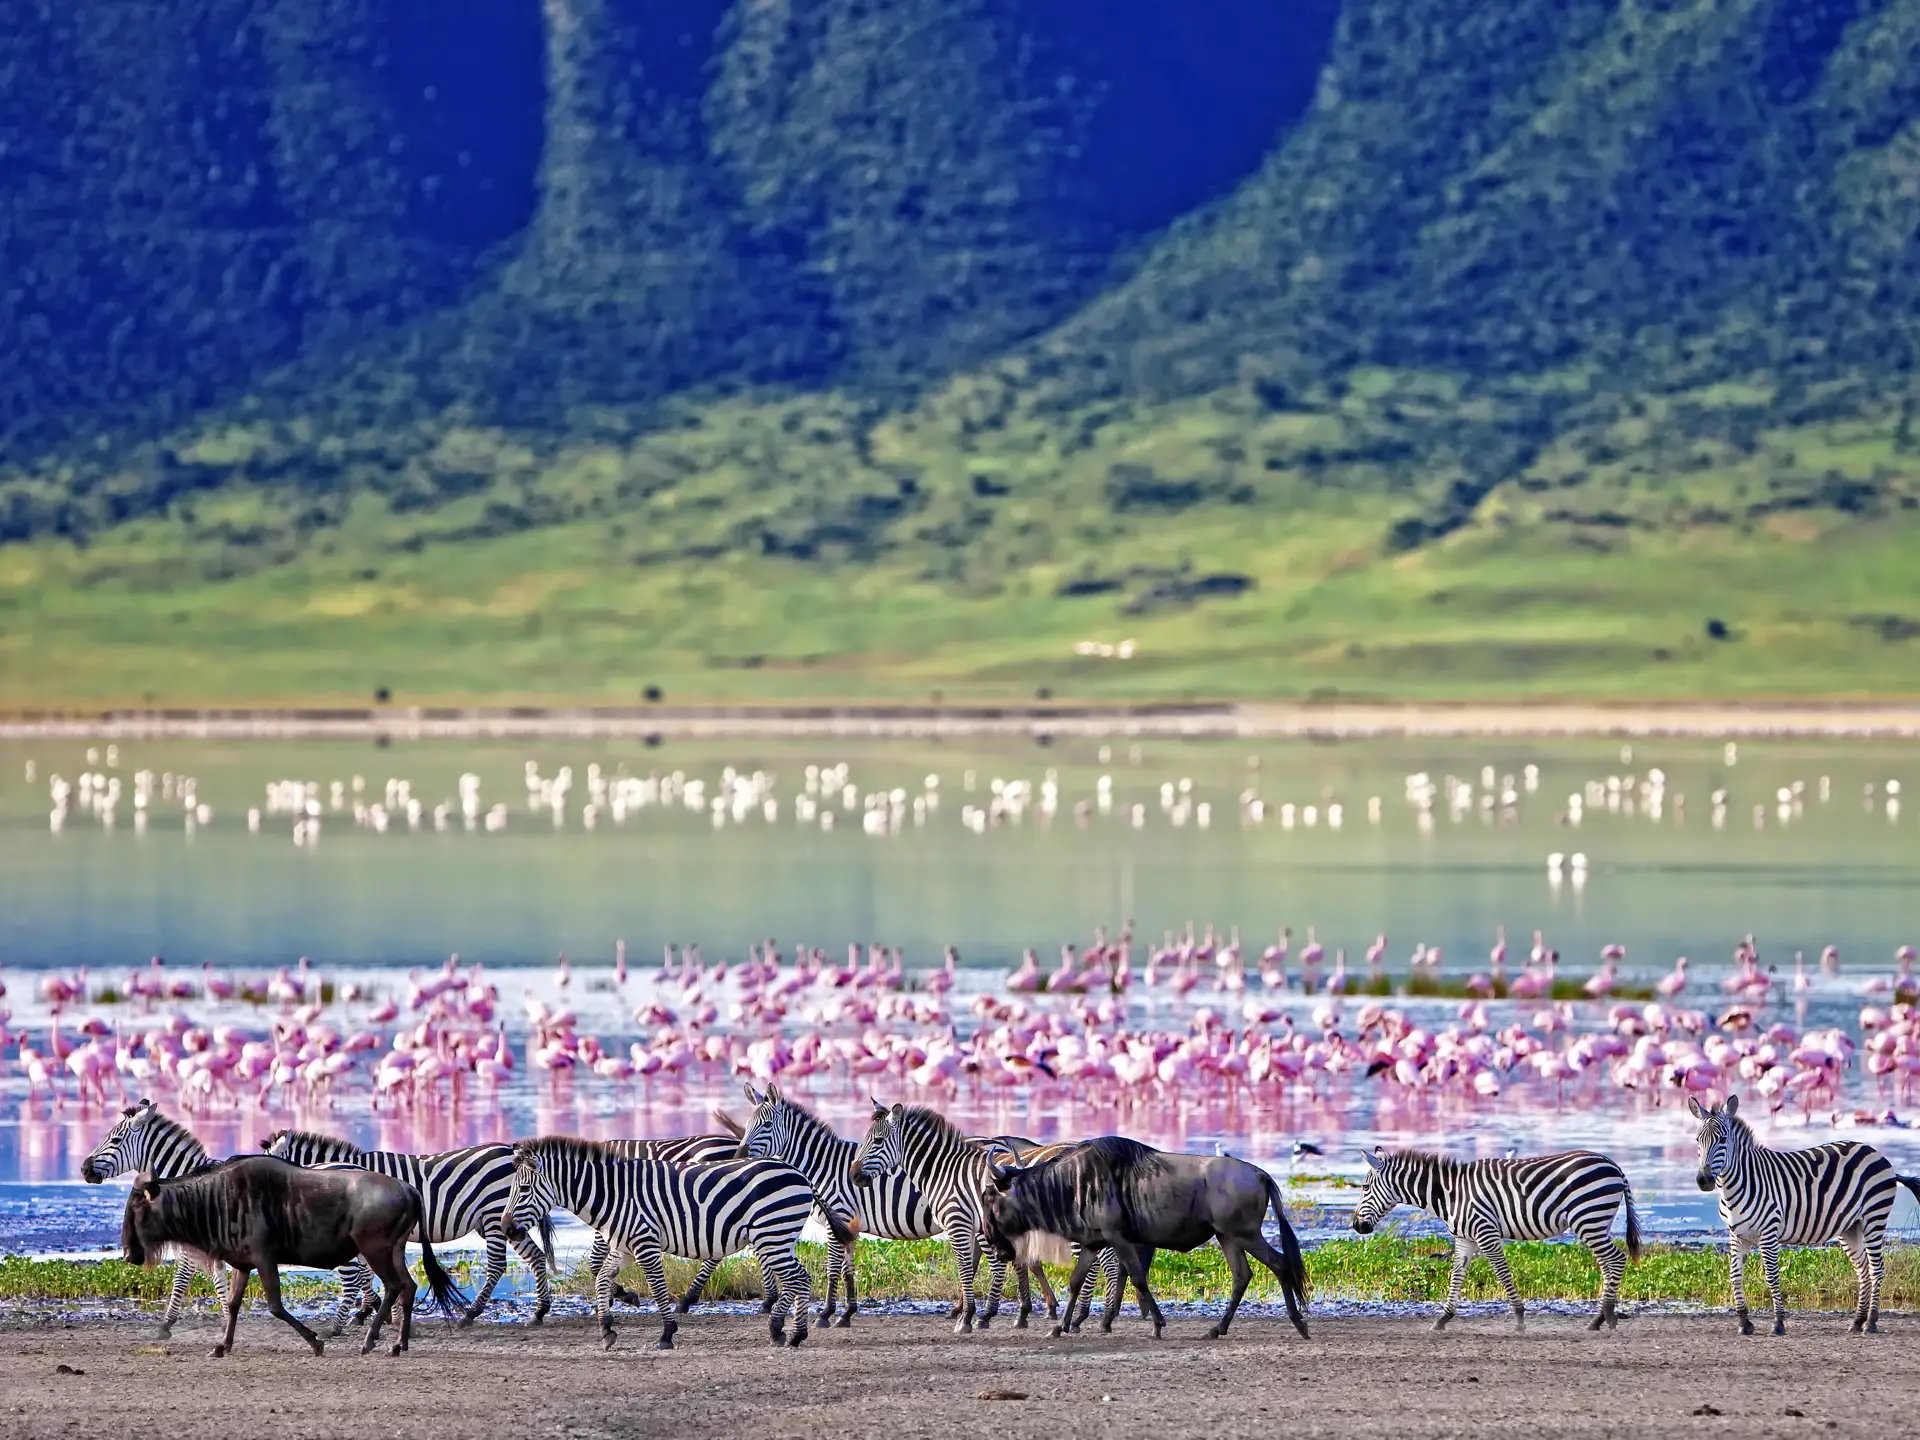 shutterstock_212602420 Zebras and wildebeests walking beside the lake in the Ngorongoro Crater, Tanzania, flamingos in the background.jpg